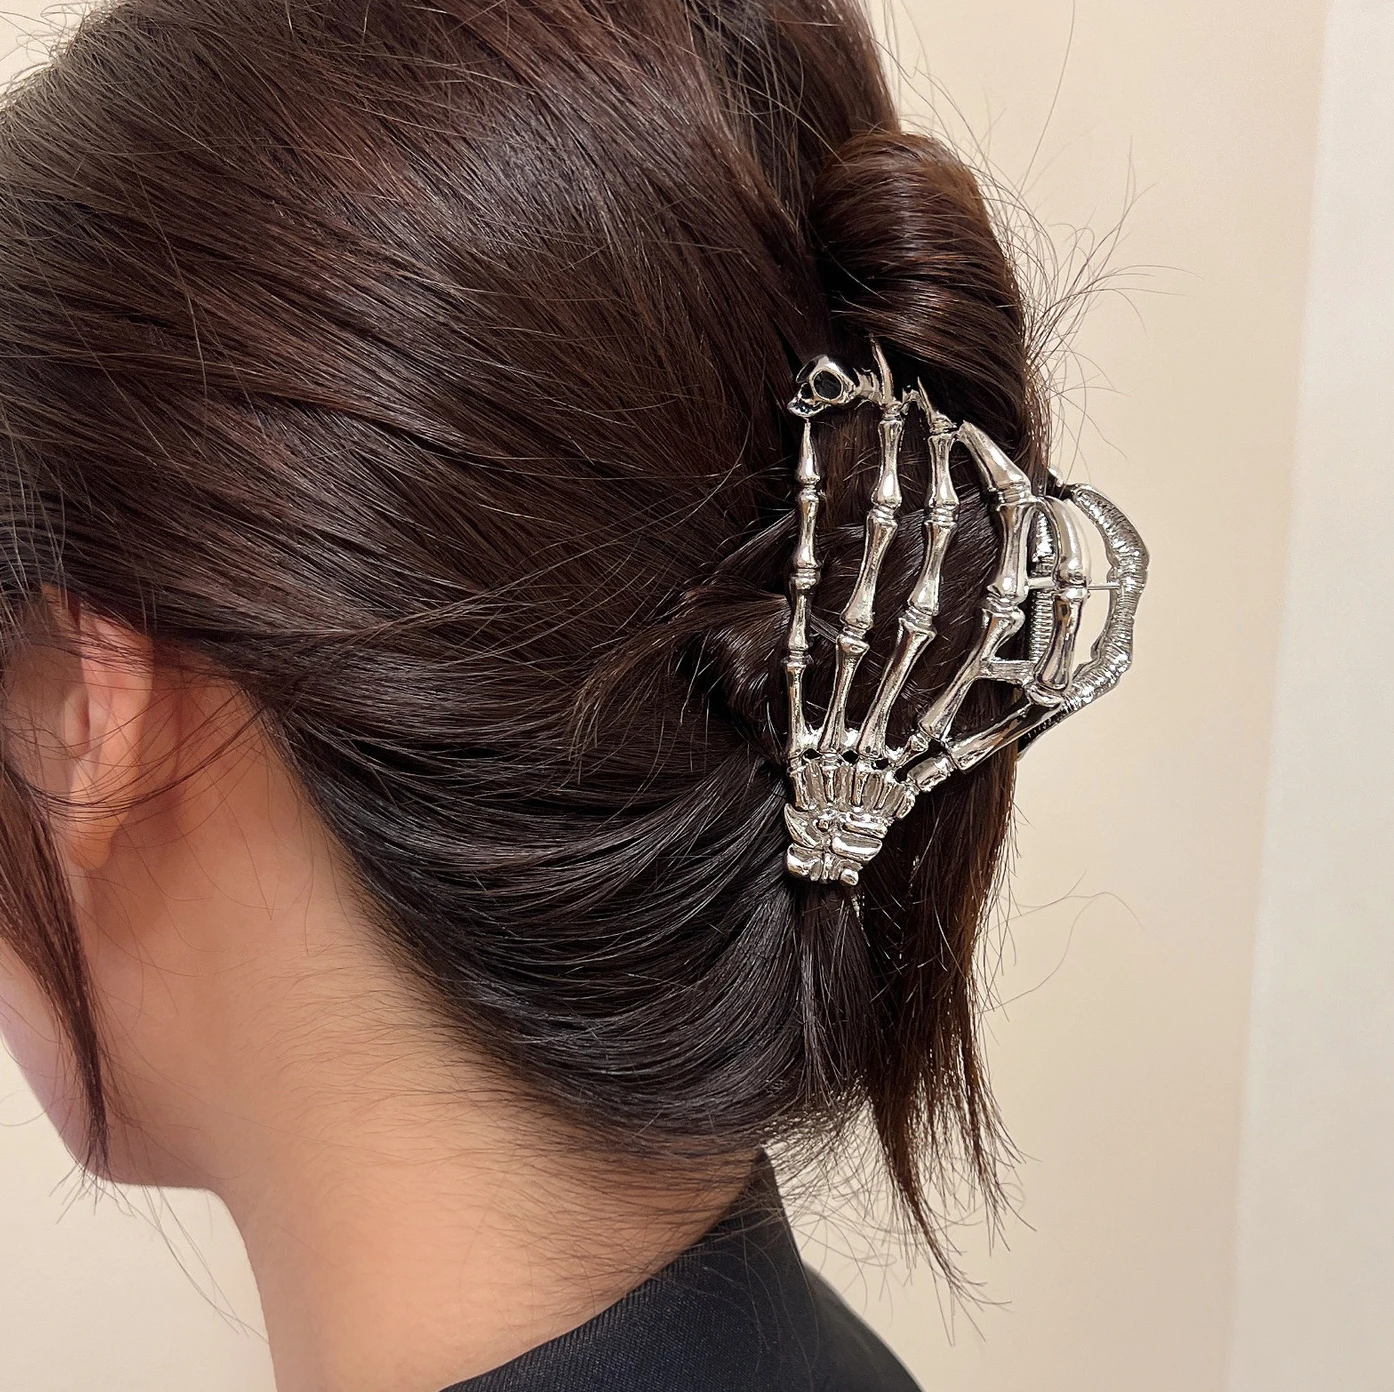 Goth Punk Metal Skull Hand Hair Claws Hip Hop Unique Back of Head Skeleton Claw Hair Clips for Women Hair Accessories Cosplay